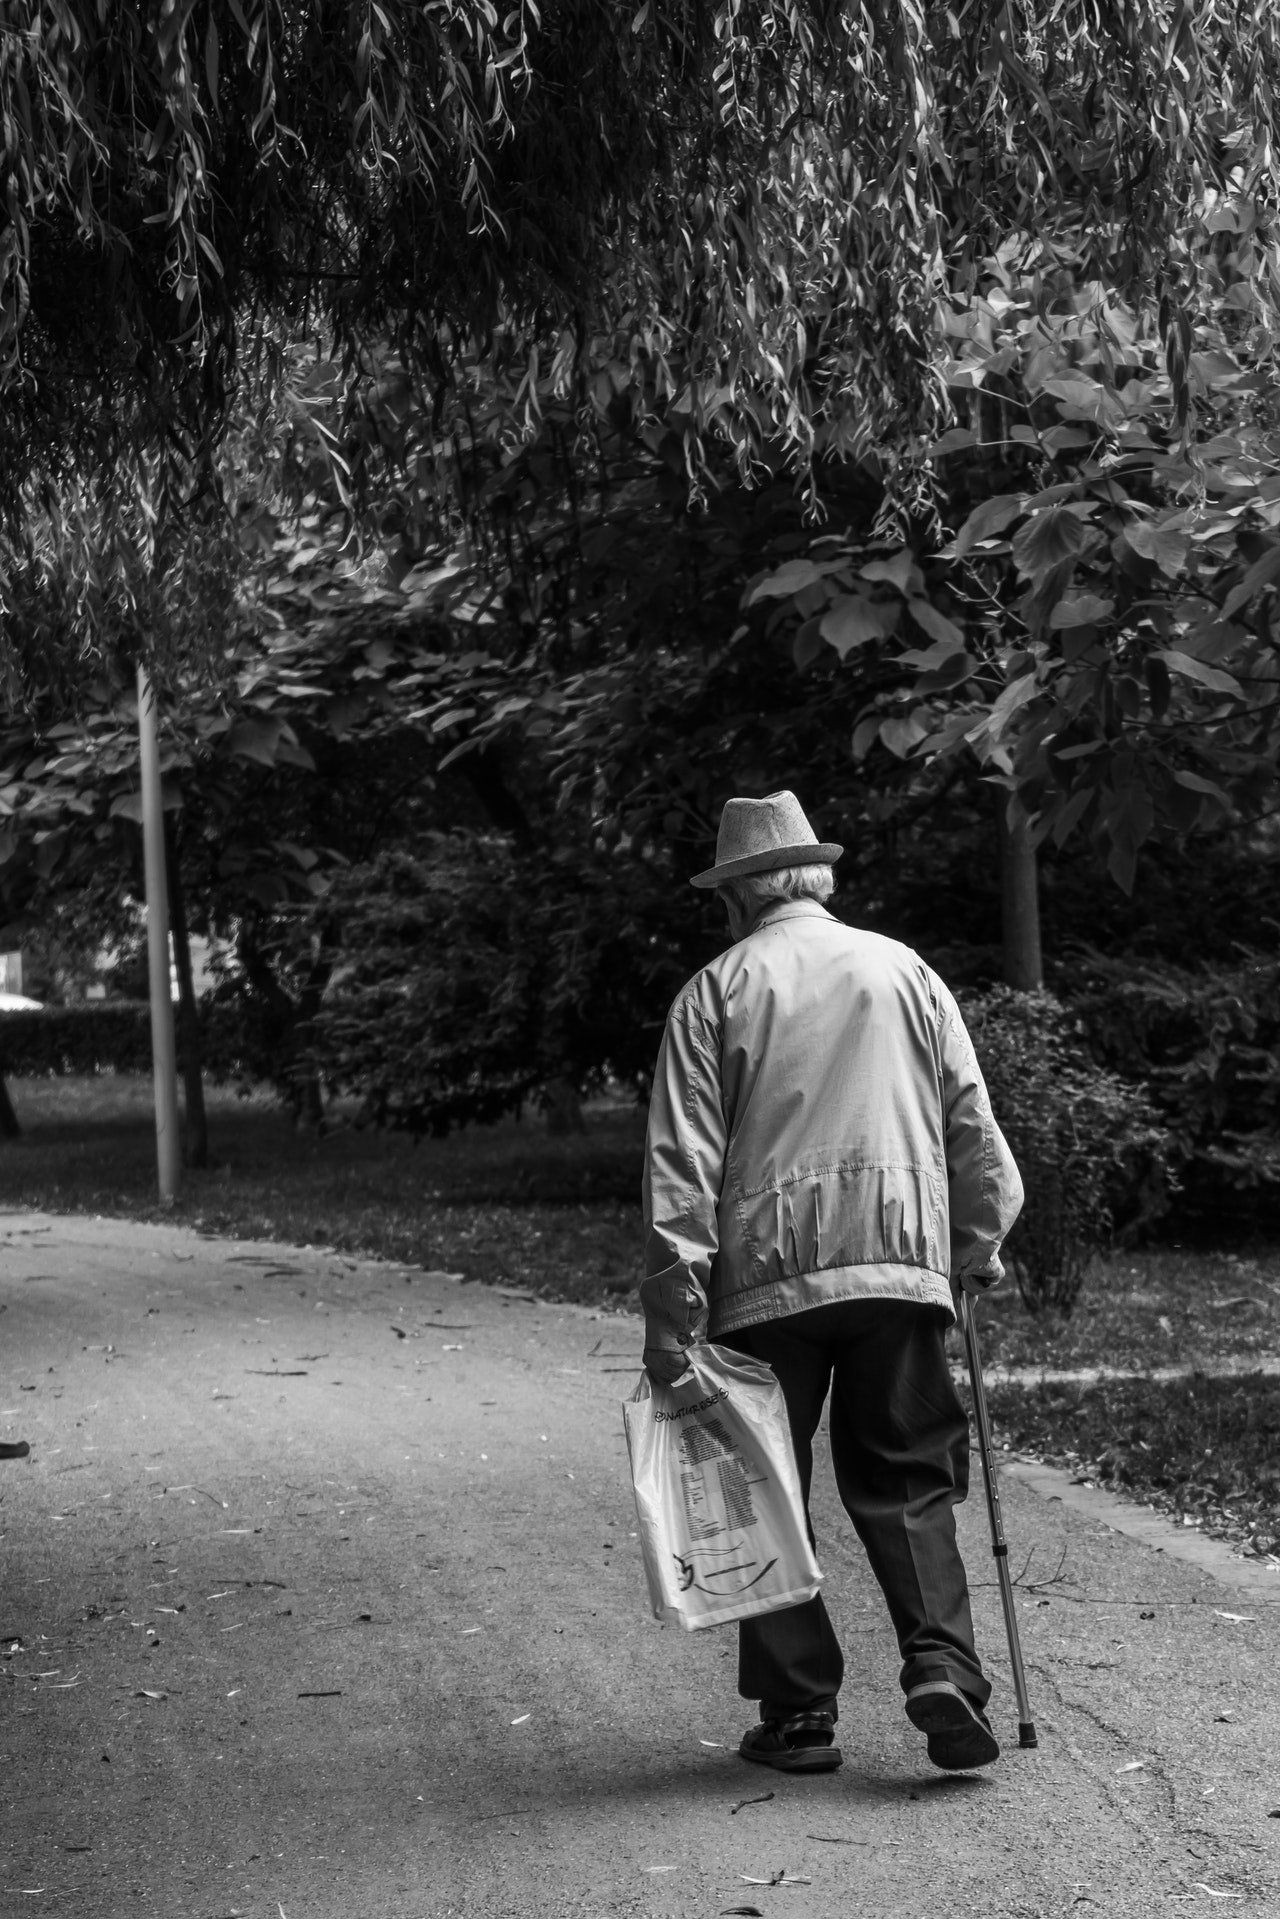 They walked towards a bench. | Source: Pexels